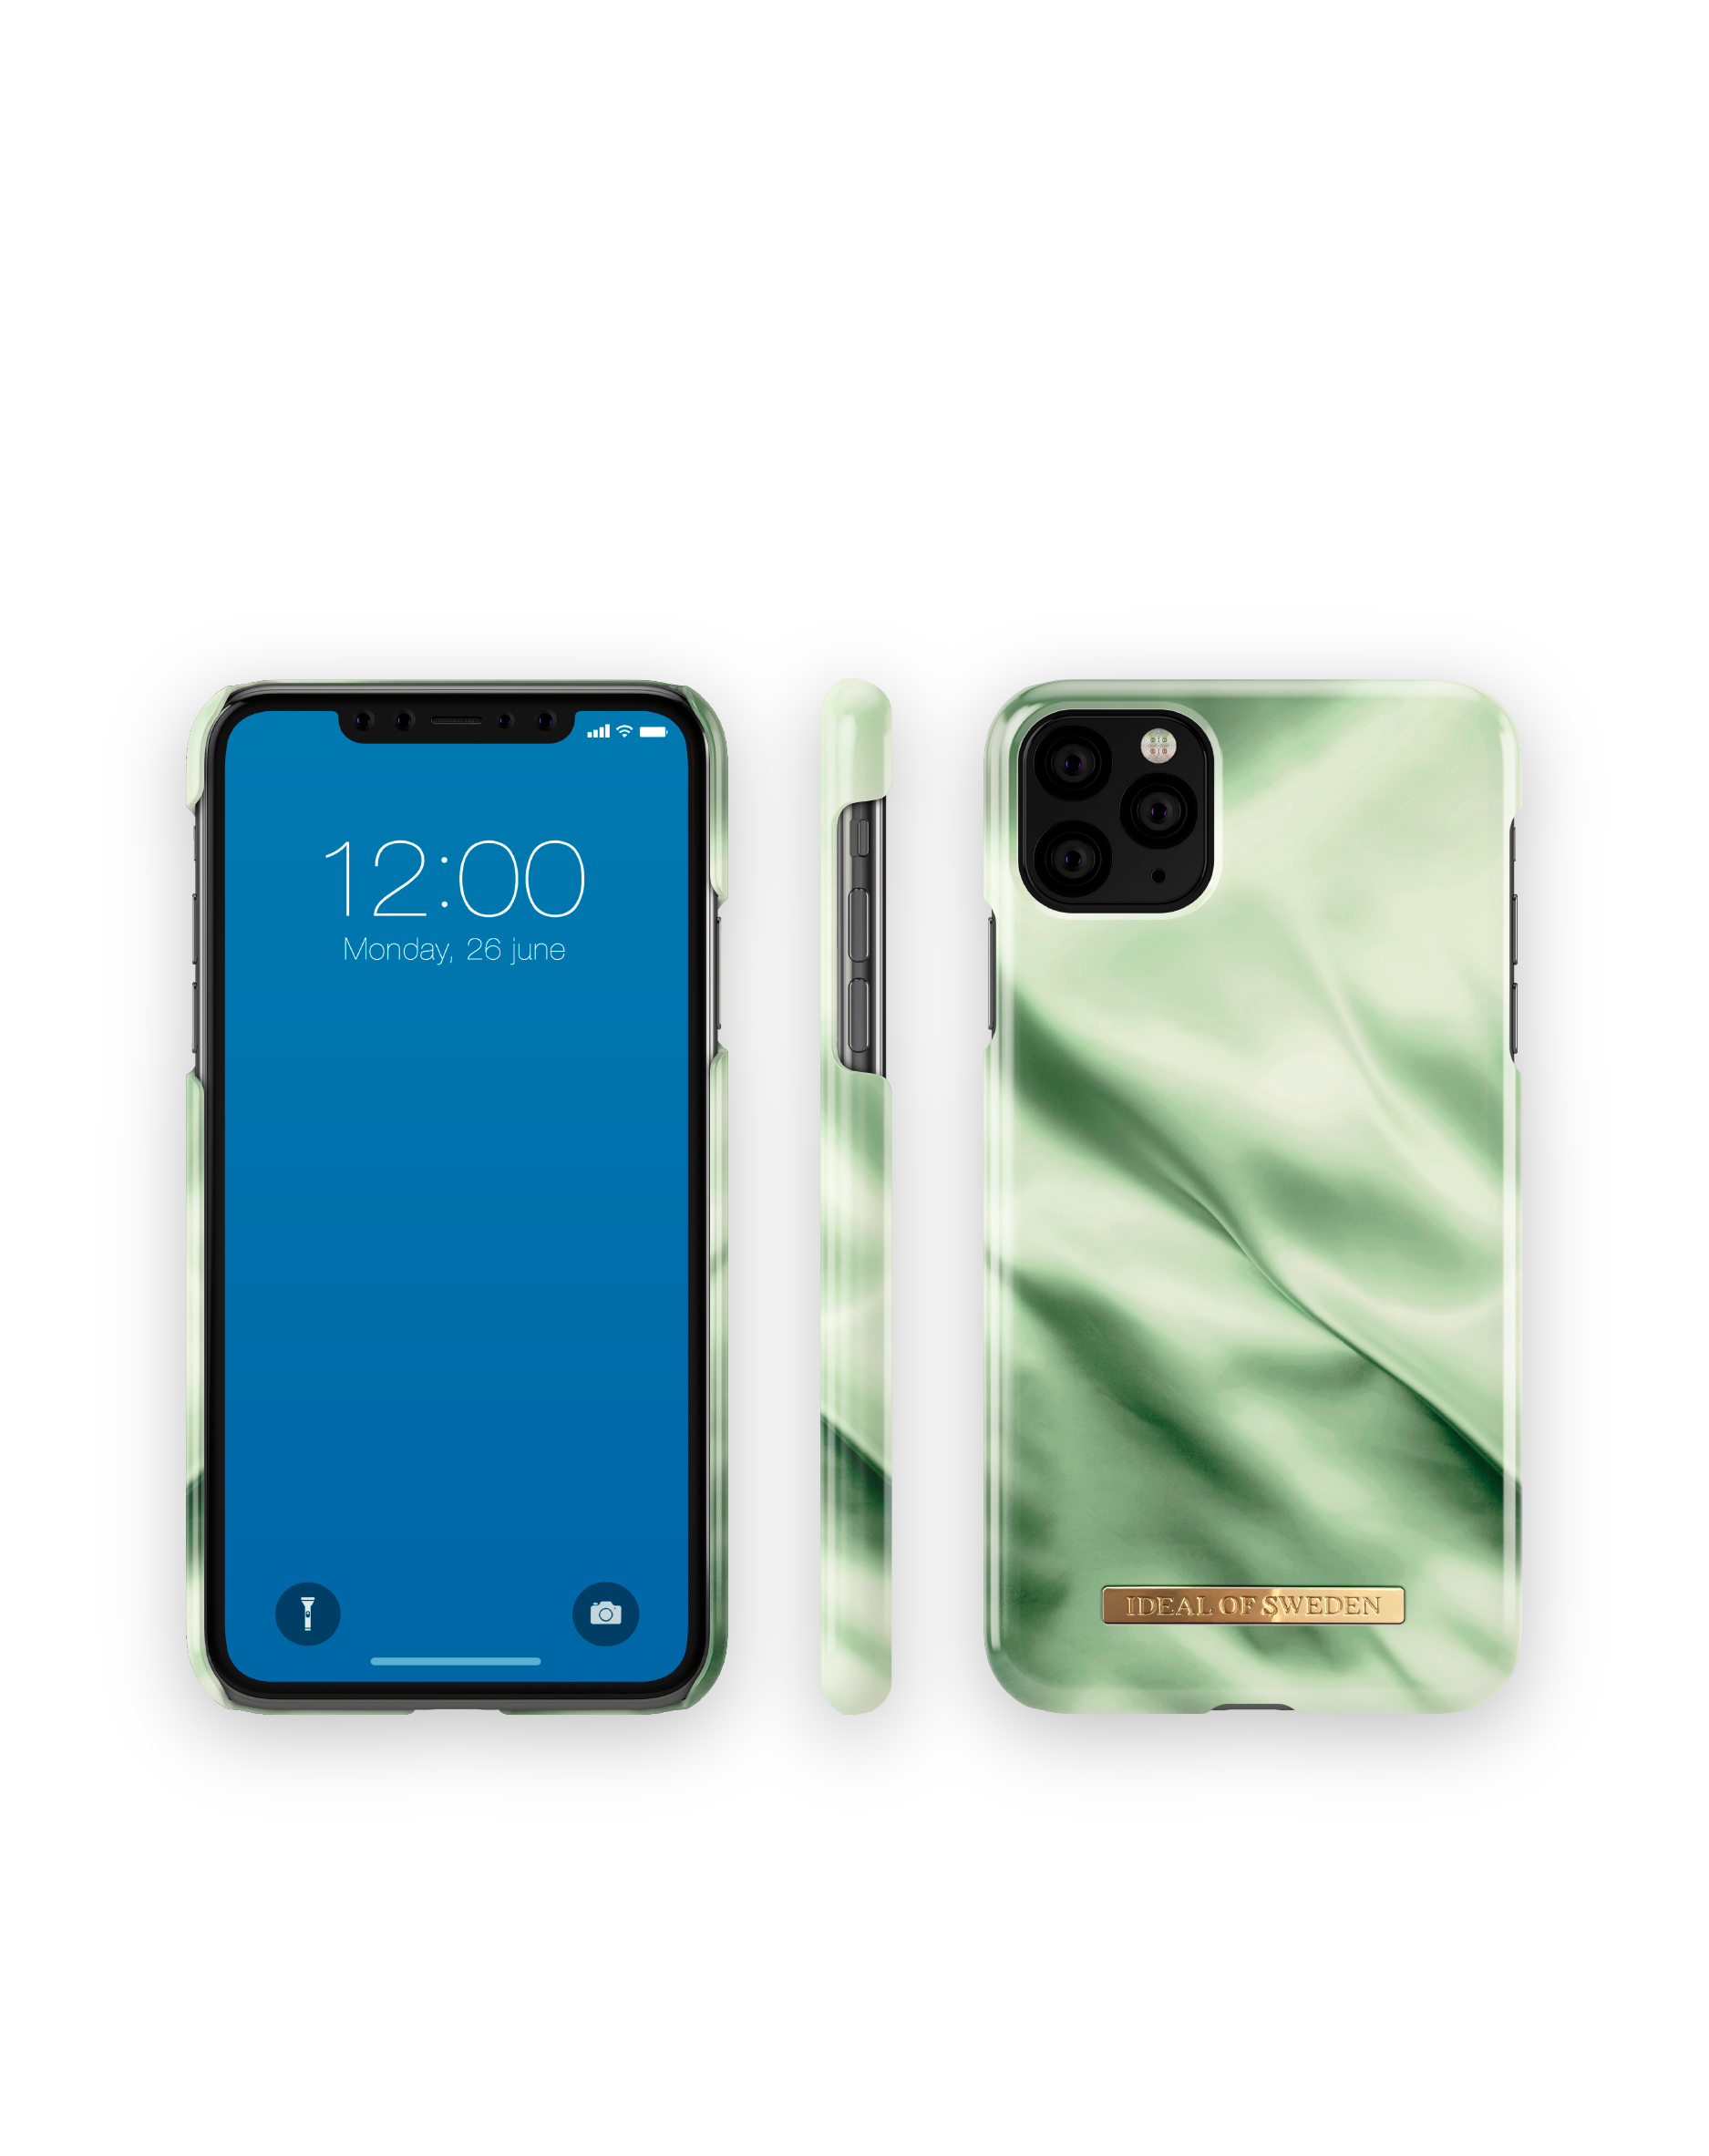 Apple Pistachio Apple, OF 11 SWEDEN XS Apple iPhone Max, Satin iPhone IDFCSC19-I1965-189, Max, Backcover, Pro IDEAL